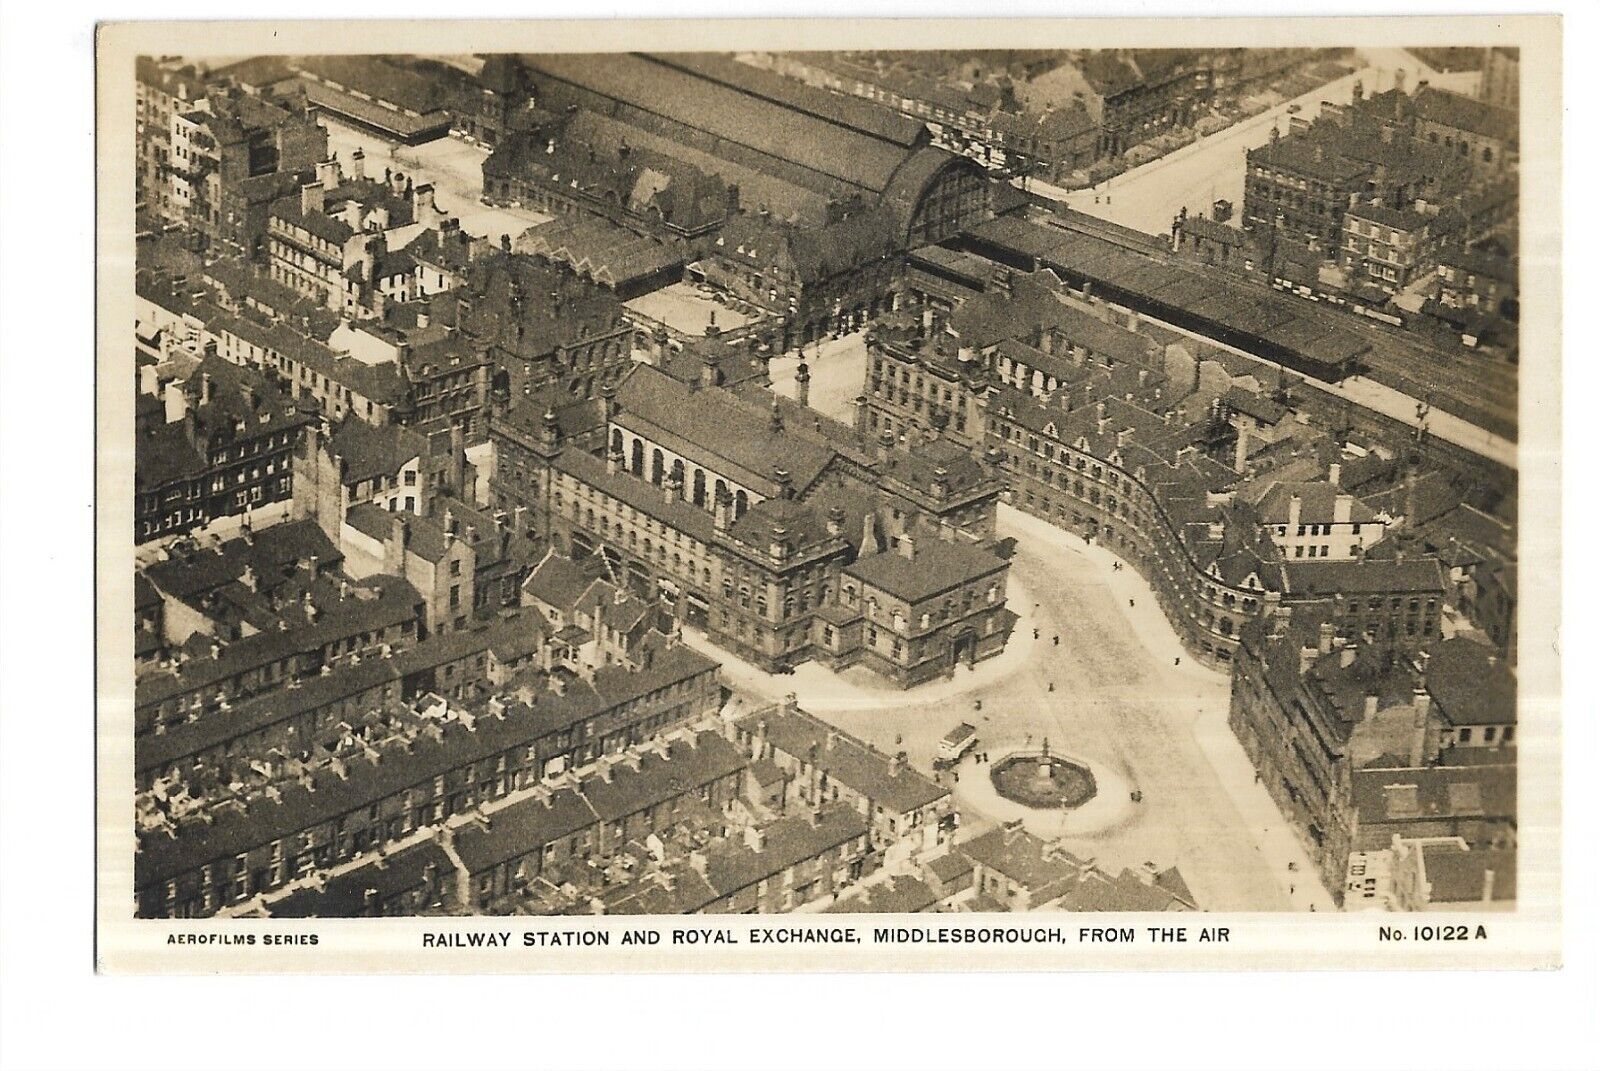 House Clearance - Yorkshire. Railway Station and Royal Exchange, Middlesbrough from the air. R/P.